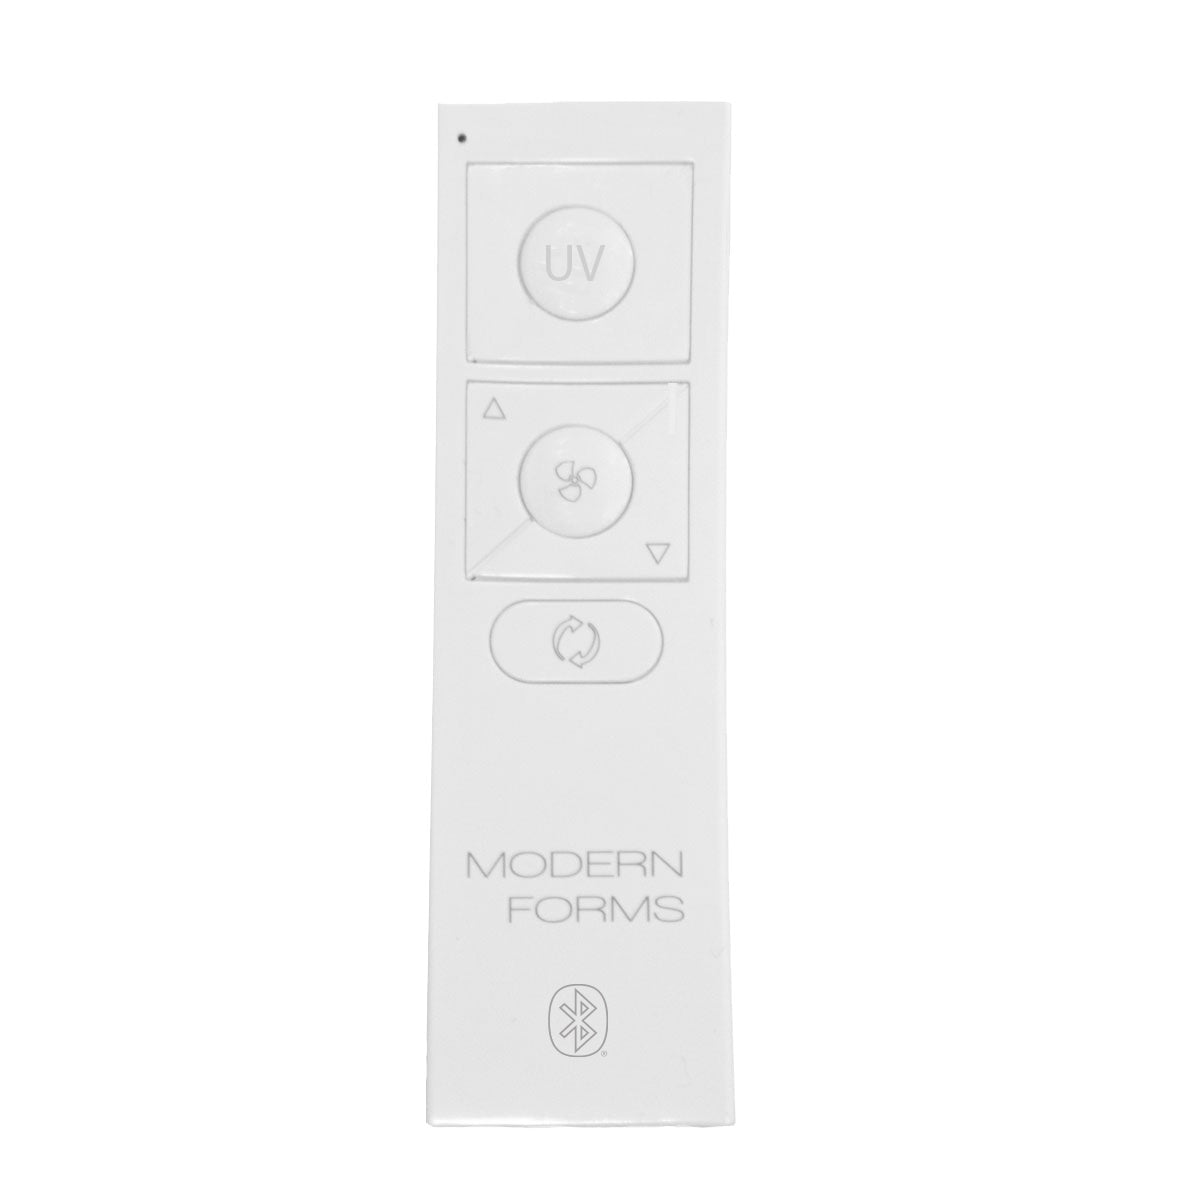 Modern Forms Fans Canada - F-RCUV-WT - Bluetooth Remote Control - Fan Accessories - White